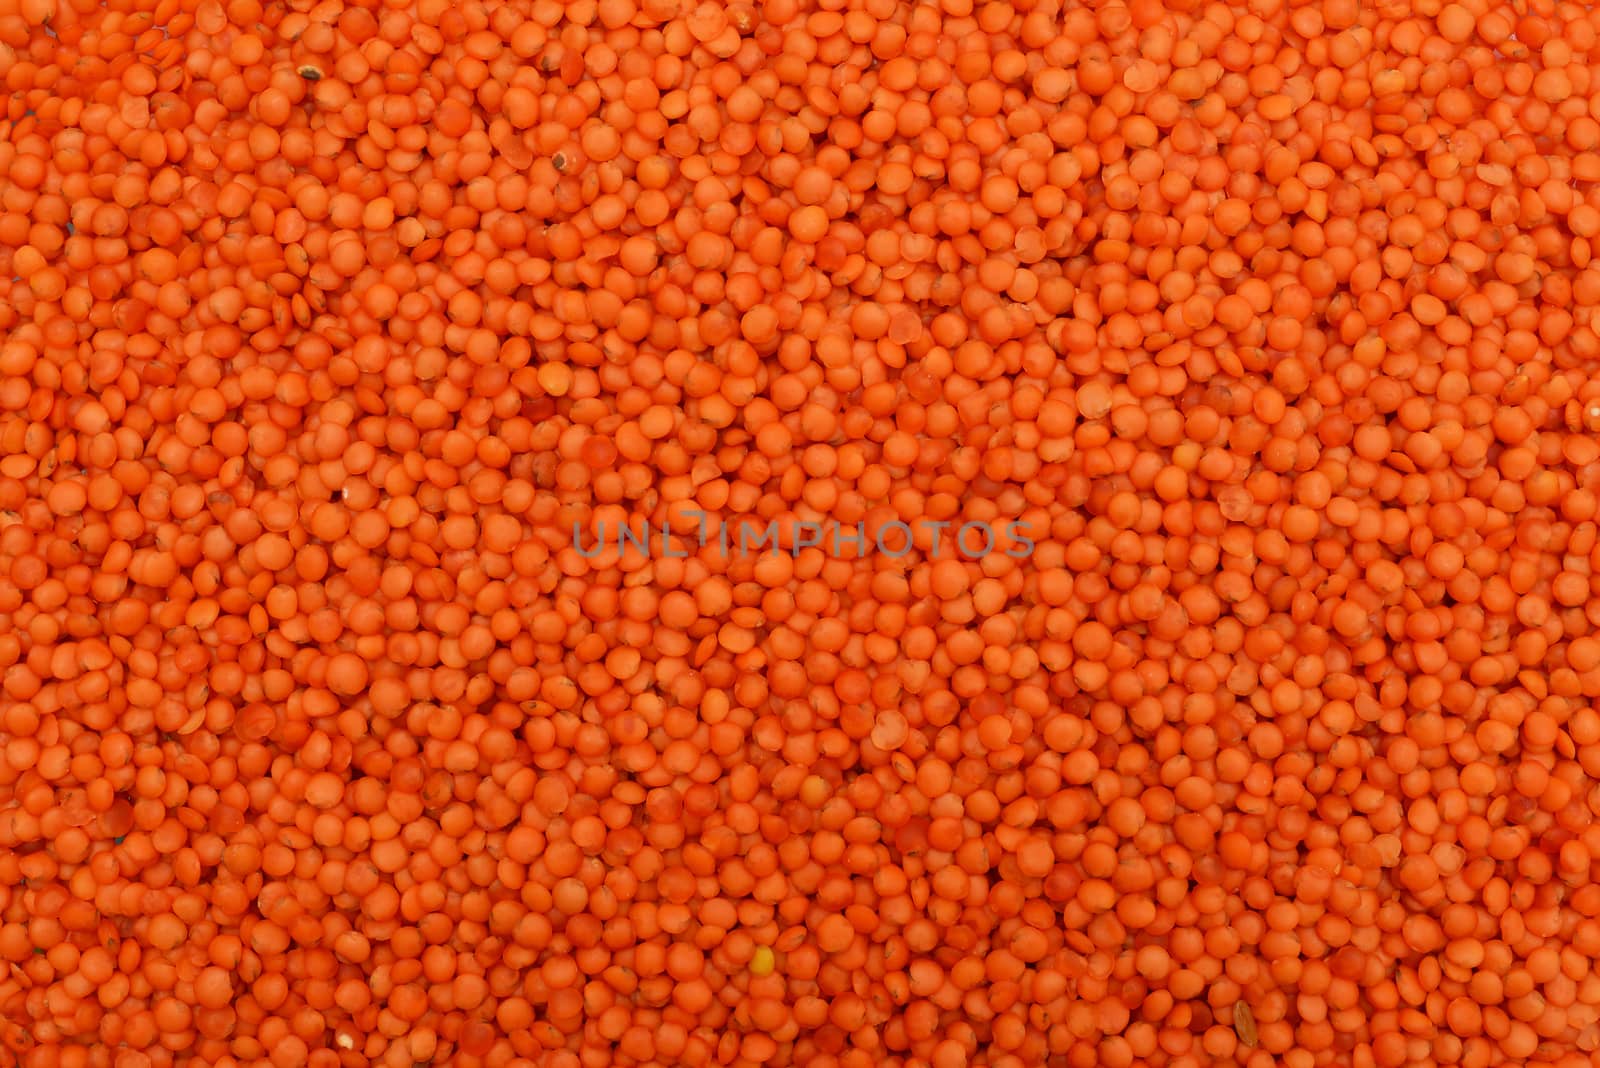 red lentil plant dry seeds texture pattern